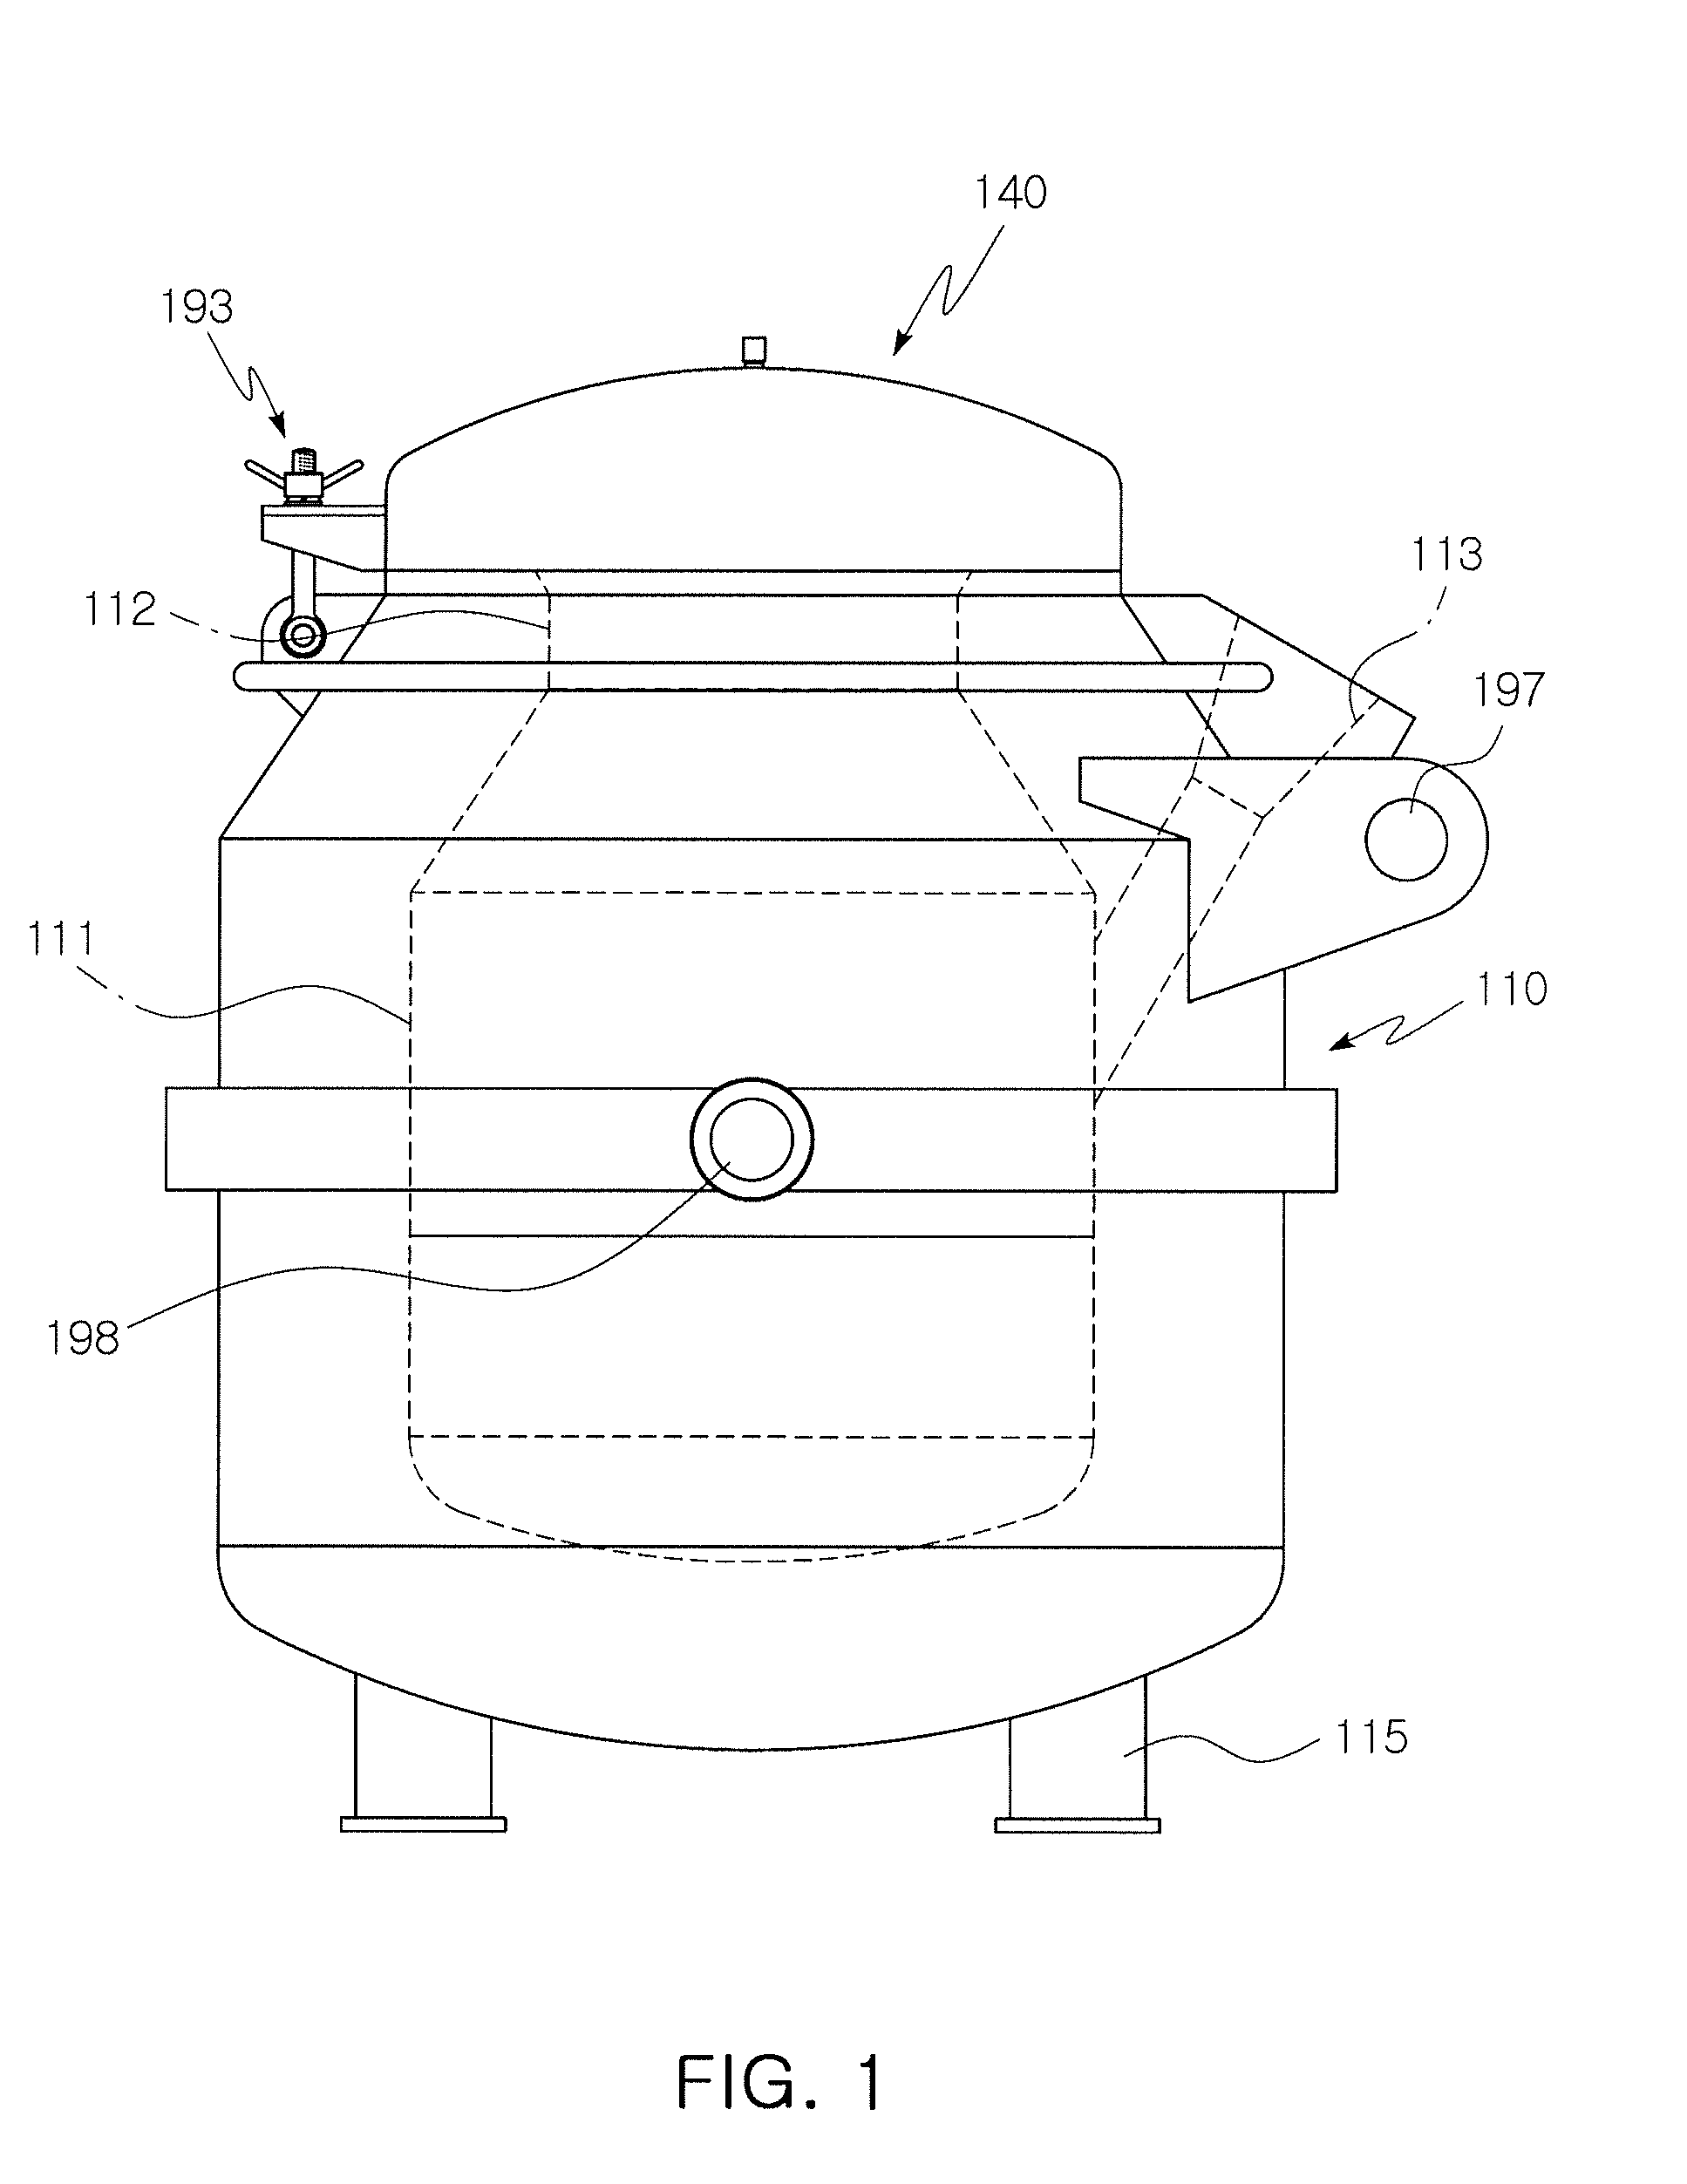 High-heat-retention ladle for carrying molten aluminum